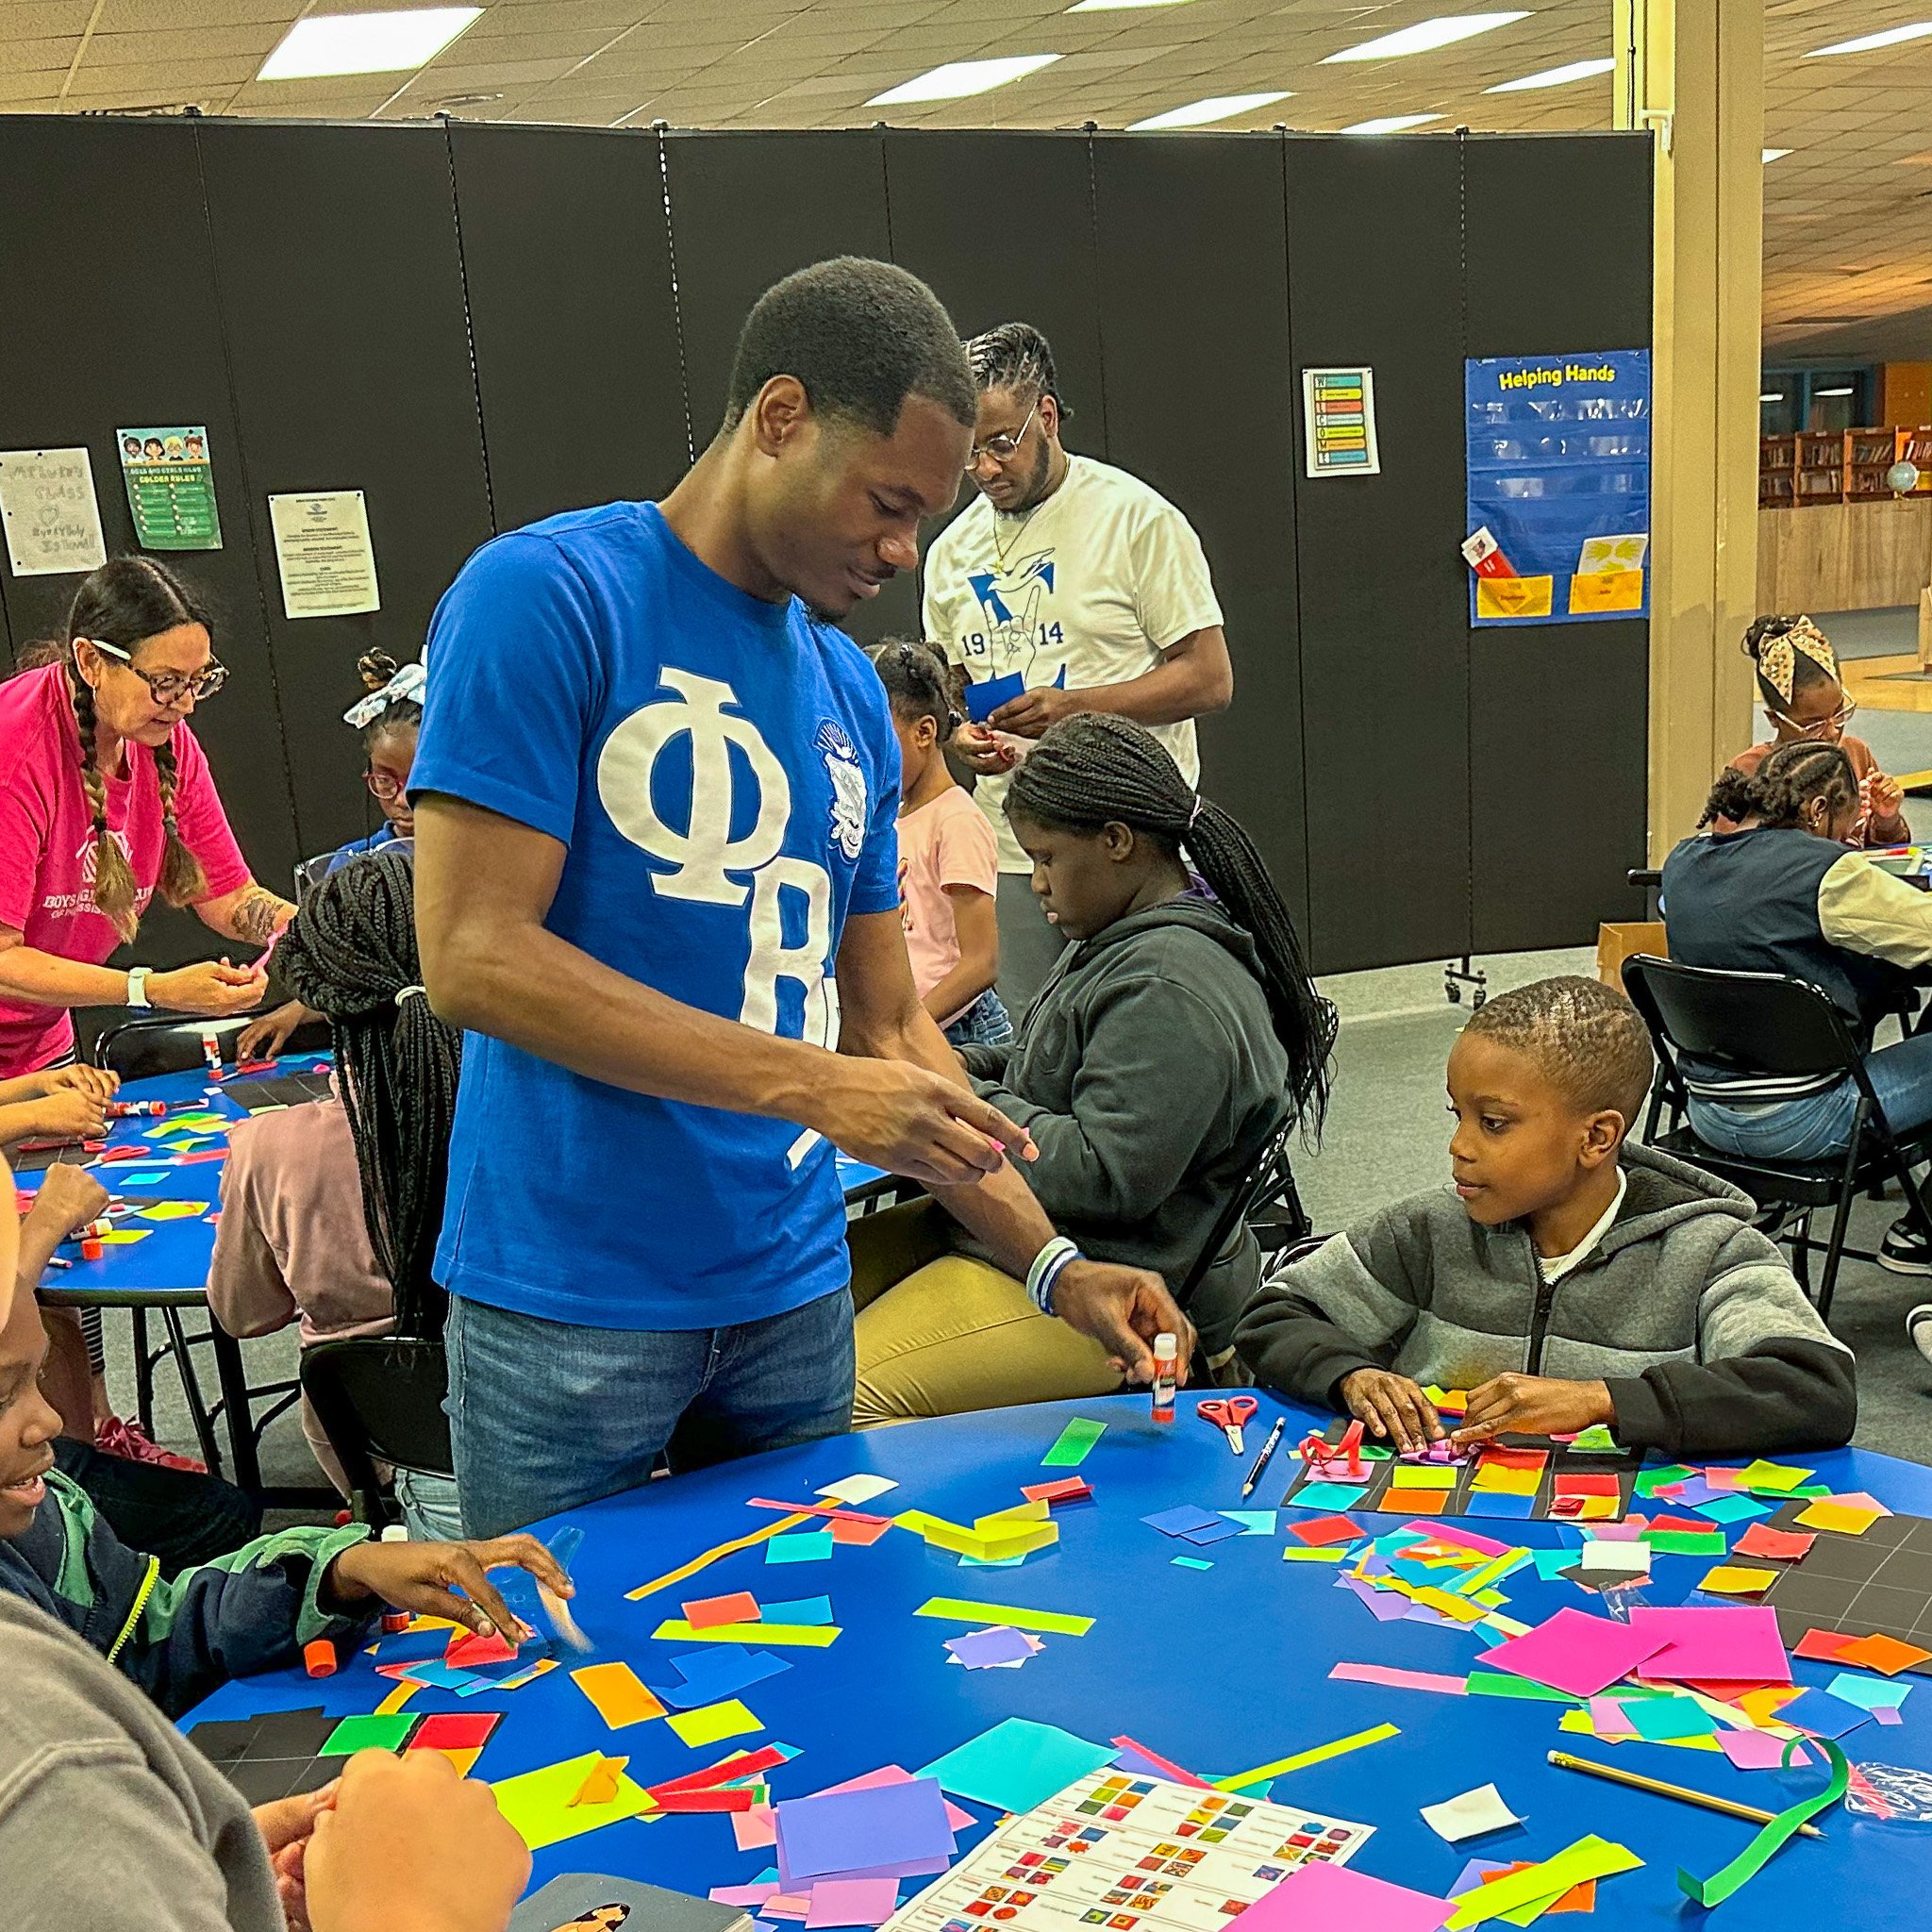 🖌️🤗 Art Meets Brotherhood at the Boys &amp; Girls Club!

Our members enjoyed a special arts and crafts session led by Ms. Yolande and the esteemed Xi Beta Chapter of Phi Beta Sigma Fraternity Inc. It was a day full of creativity, learning, and brot